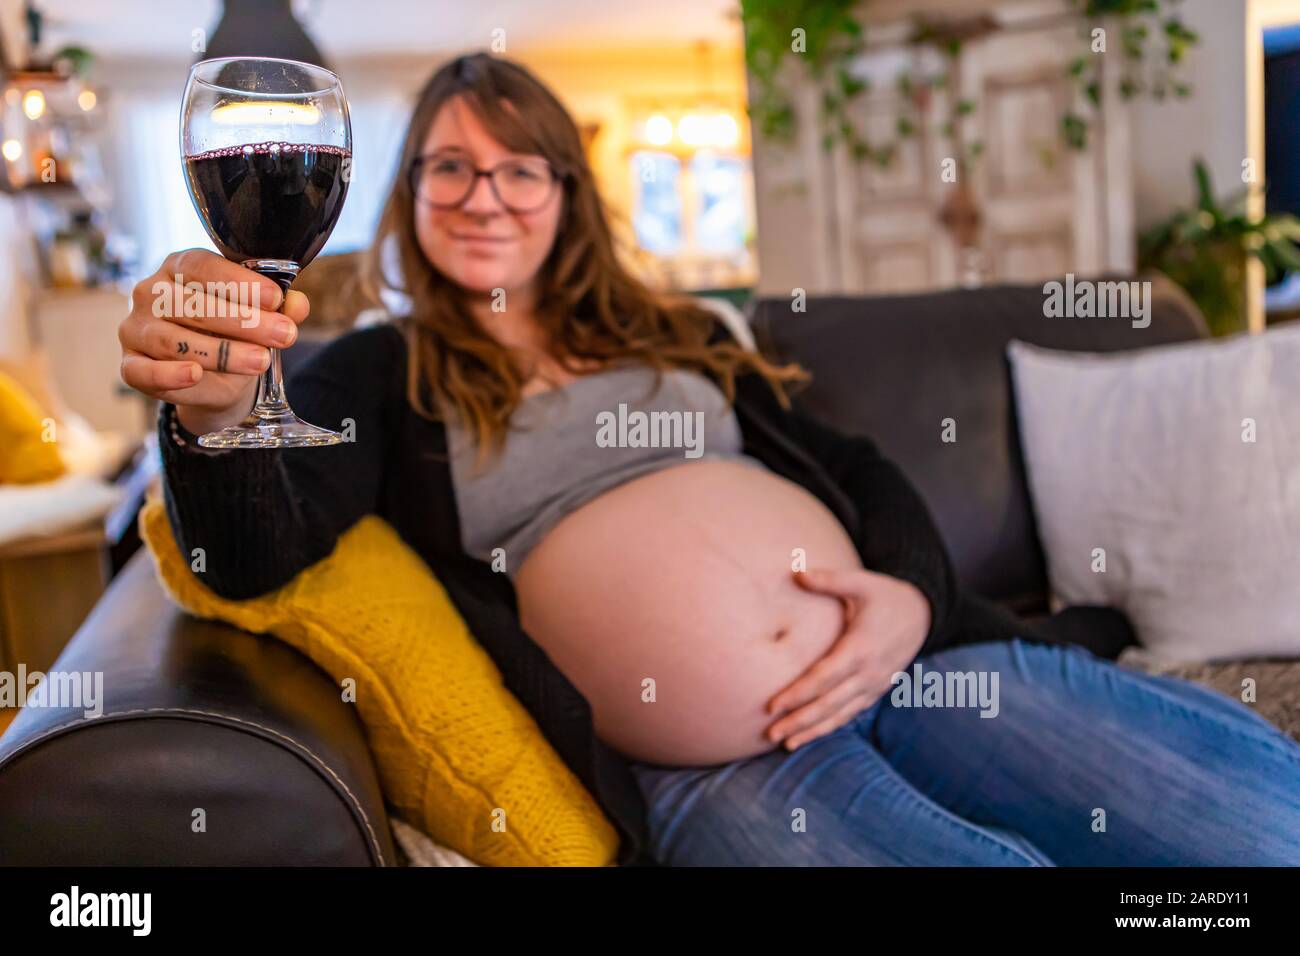 A shallow depth of field as a blurry pregnant woman relaxes on sofa in family room with glass of red wine, risking fetal alcohol syndrome. Copy space to right Stock Photo